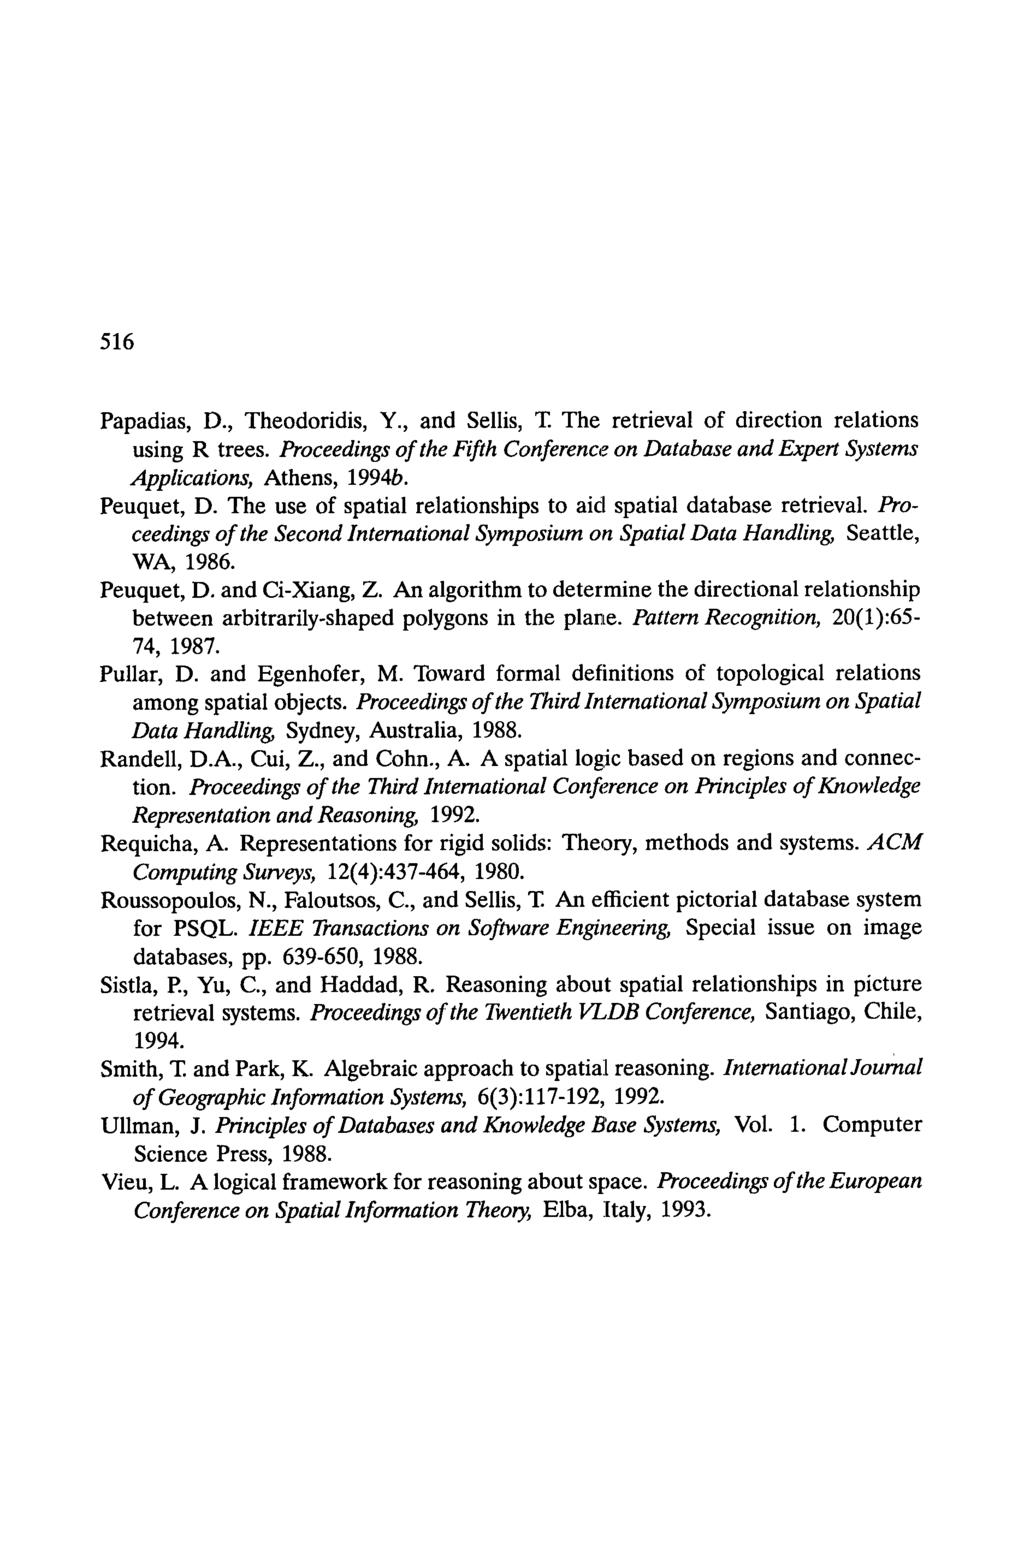 516 Papadias, D., Theodoridis, Y., and Sellis, T. The retrieval of direction relations using R trees. Proceedings of the Fifth Conference on Database and Expert Systems Applications, Athens, 1994b.